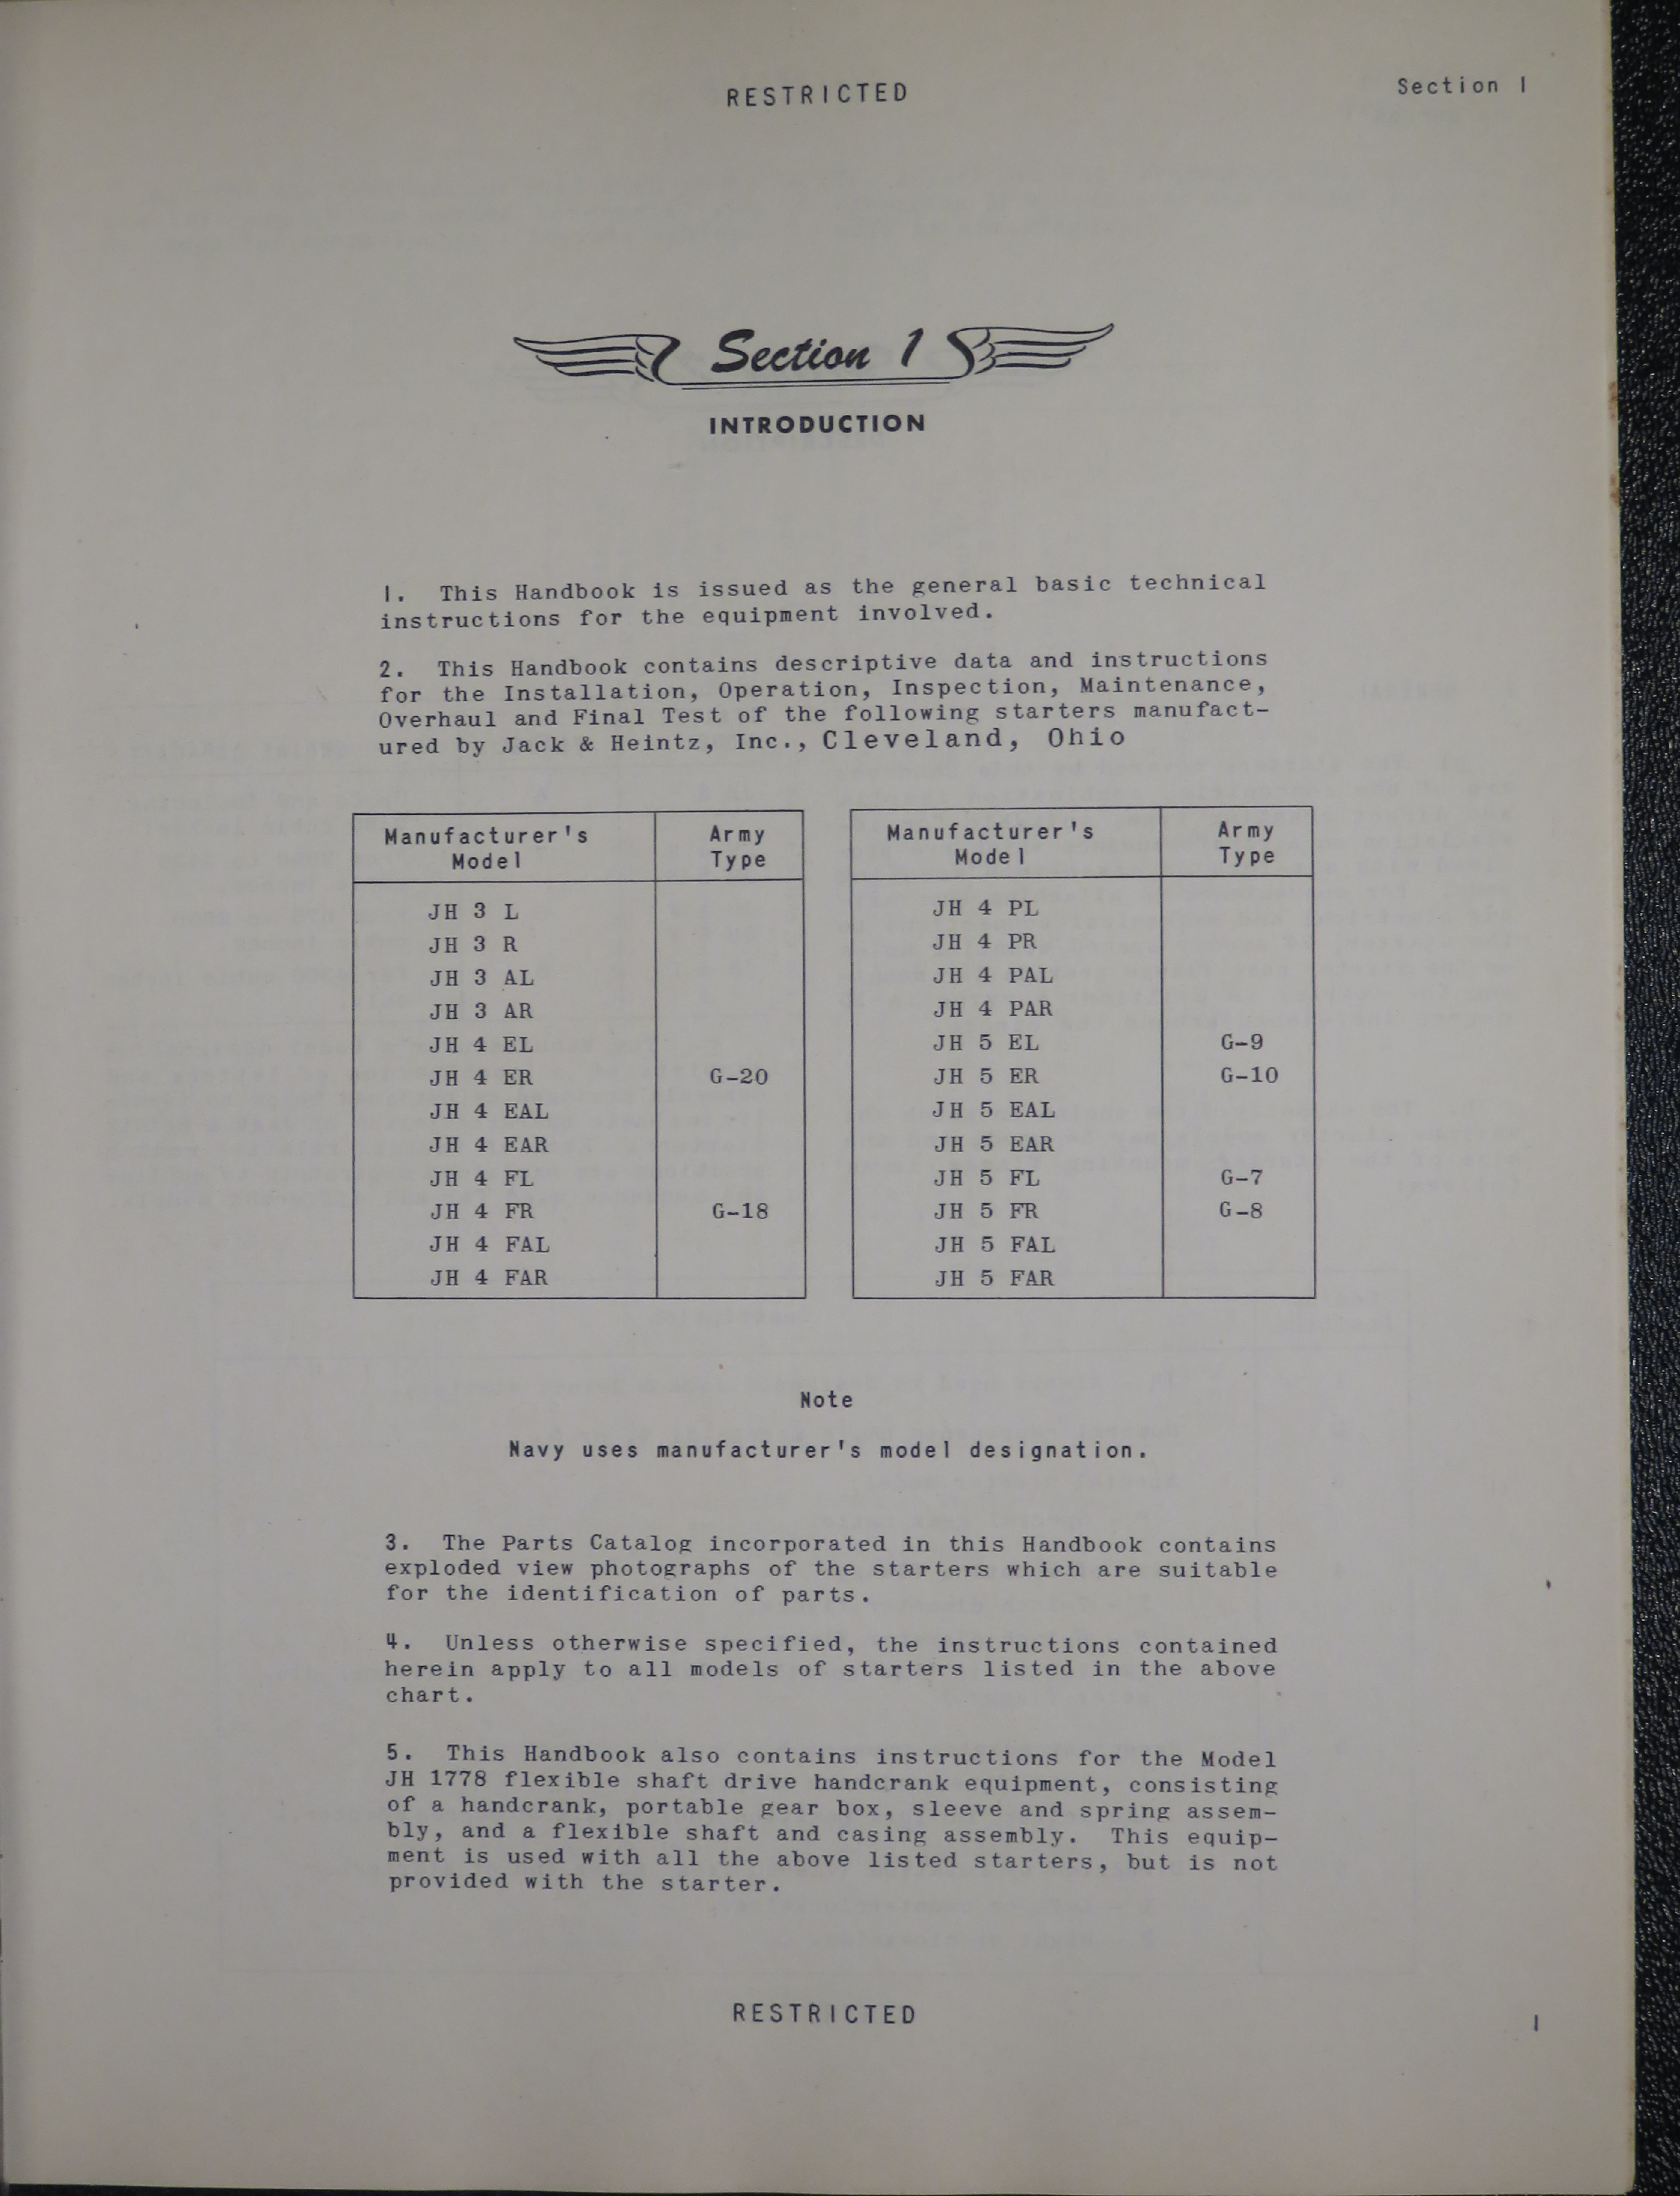 Sample page 7 from AirCorps Library document: Handbook of Instructions with Parts Catalog for Jahco Electric Starters Models JH3, JH4, and JH5 Series